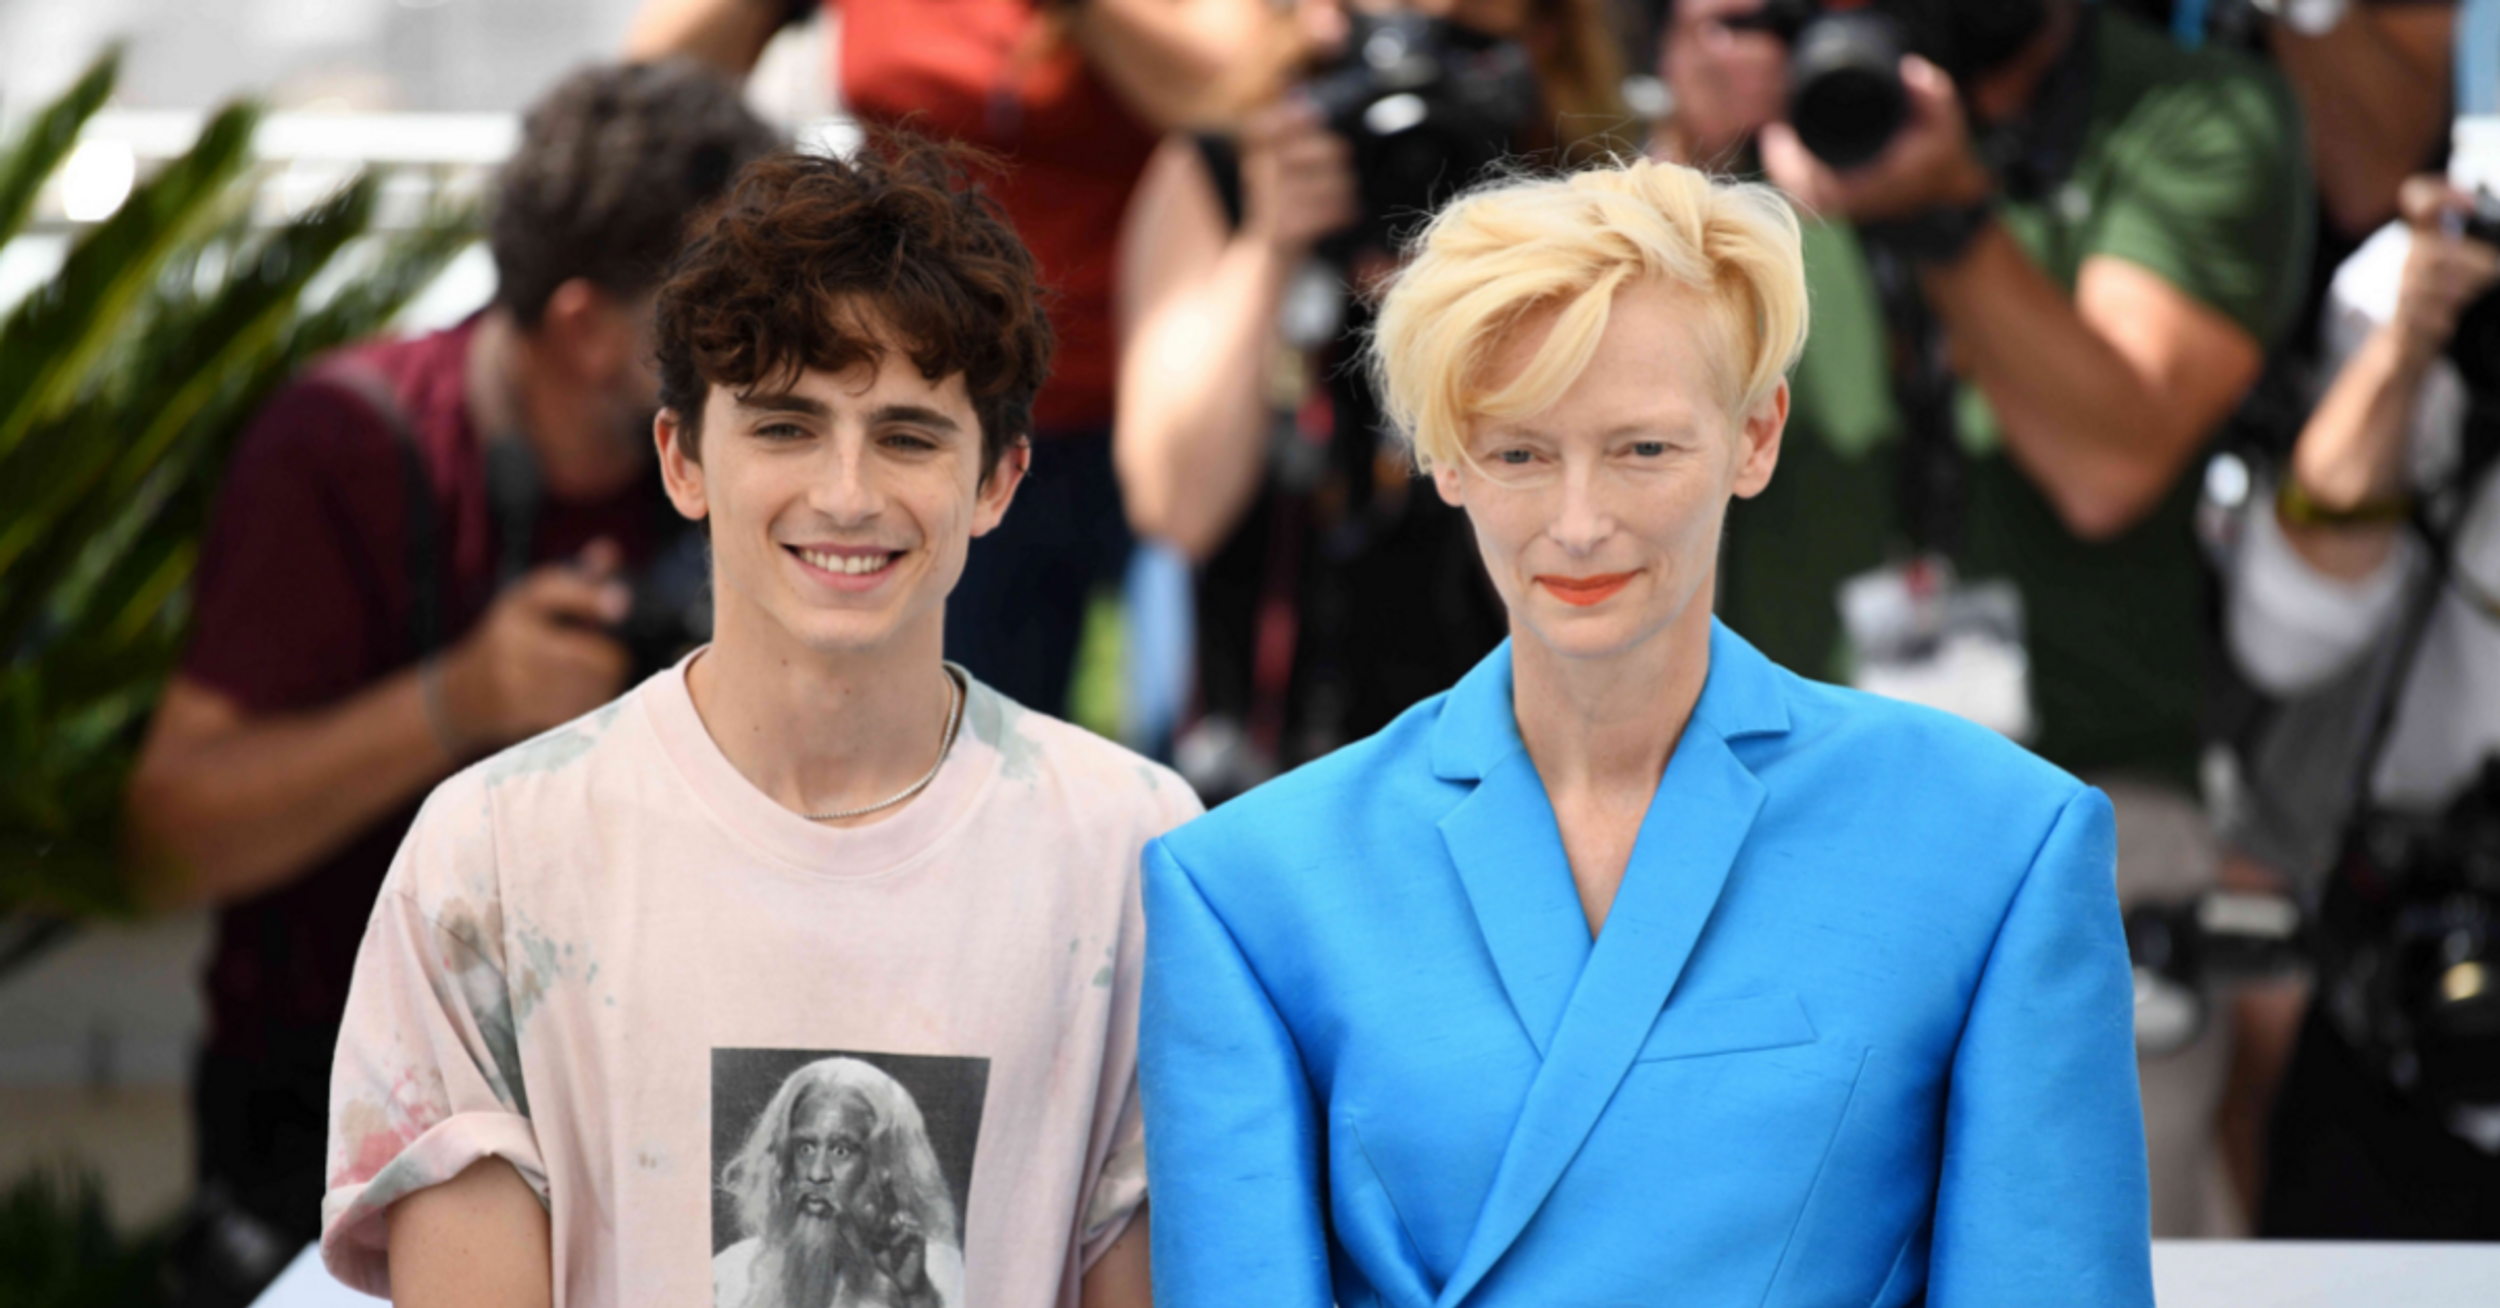 Tilda Swinton Just Pulled The Oldest Prank In The Book On Timothée Chalamet—And It's Glorious